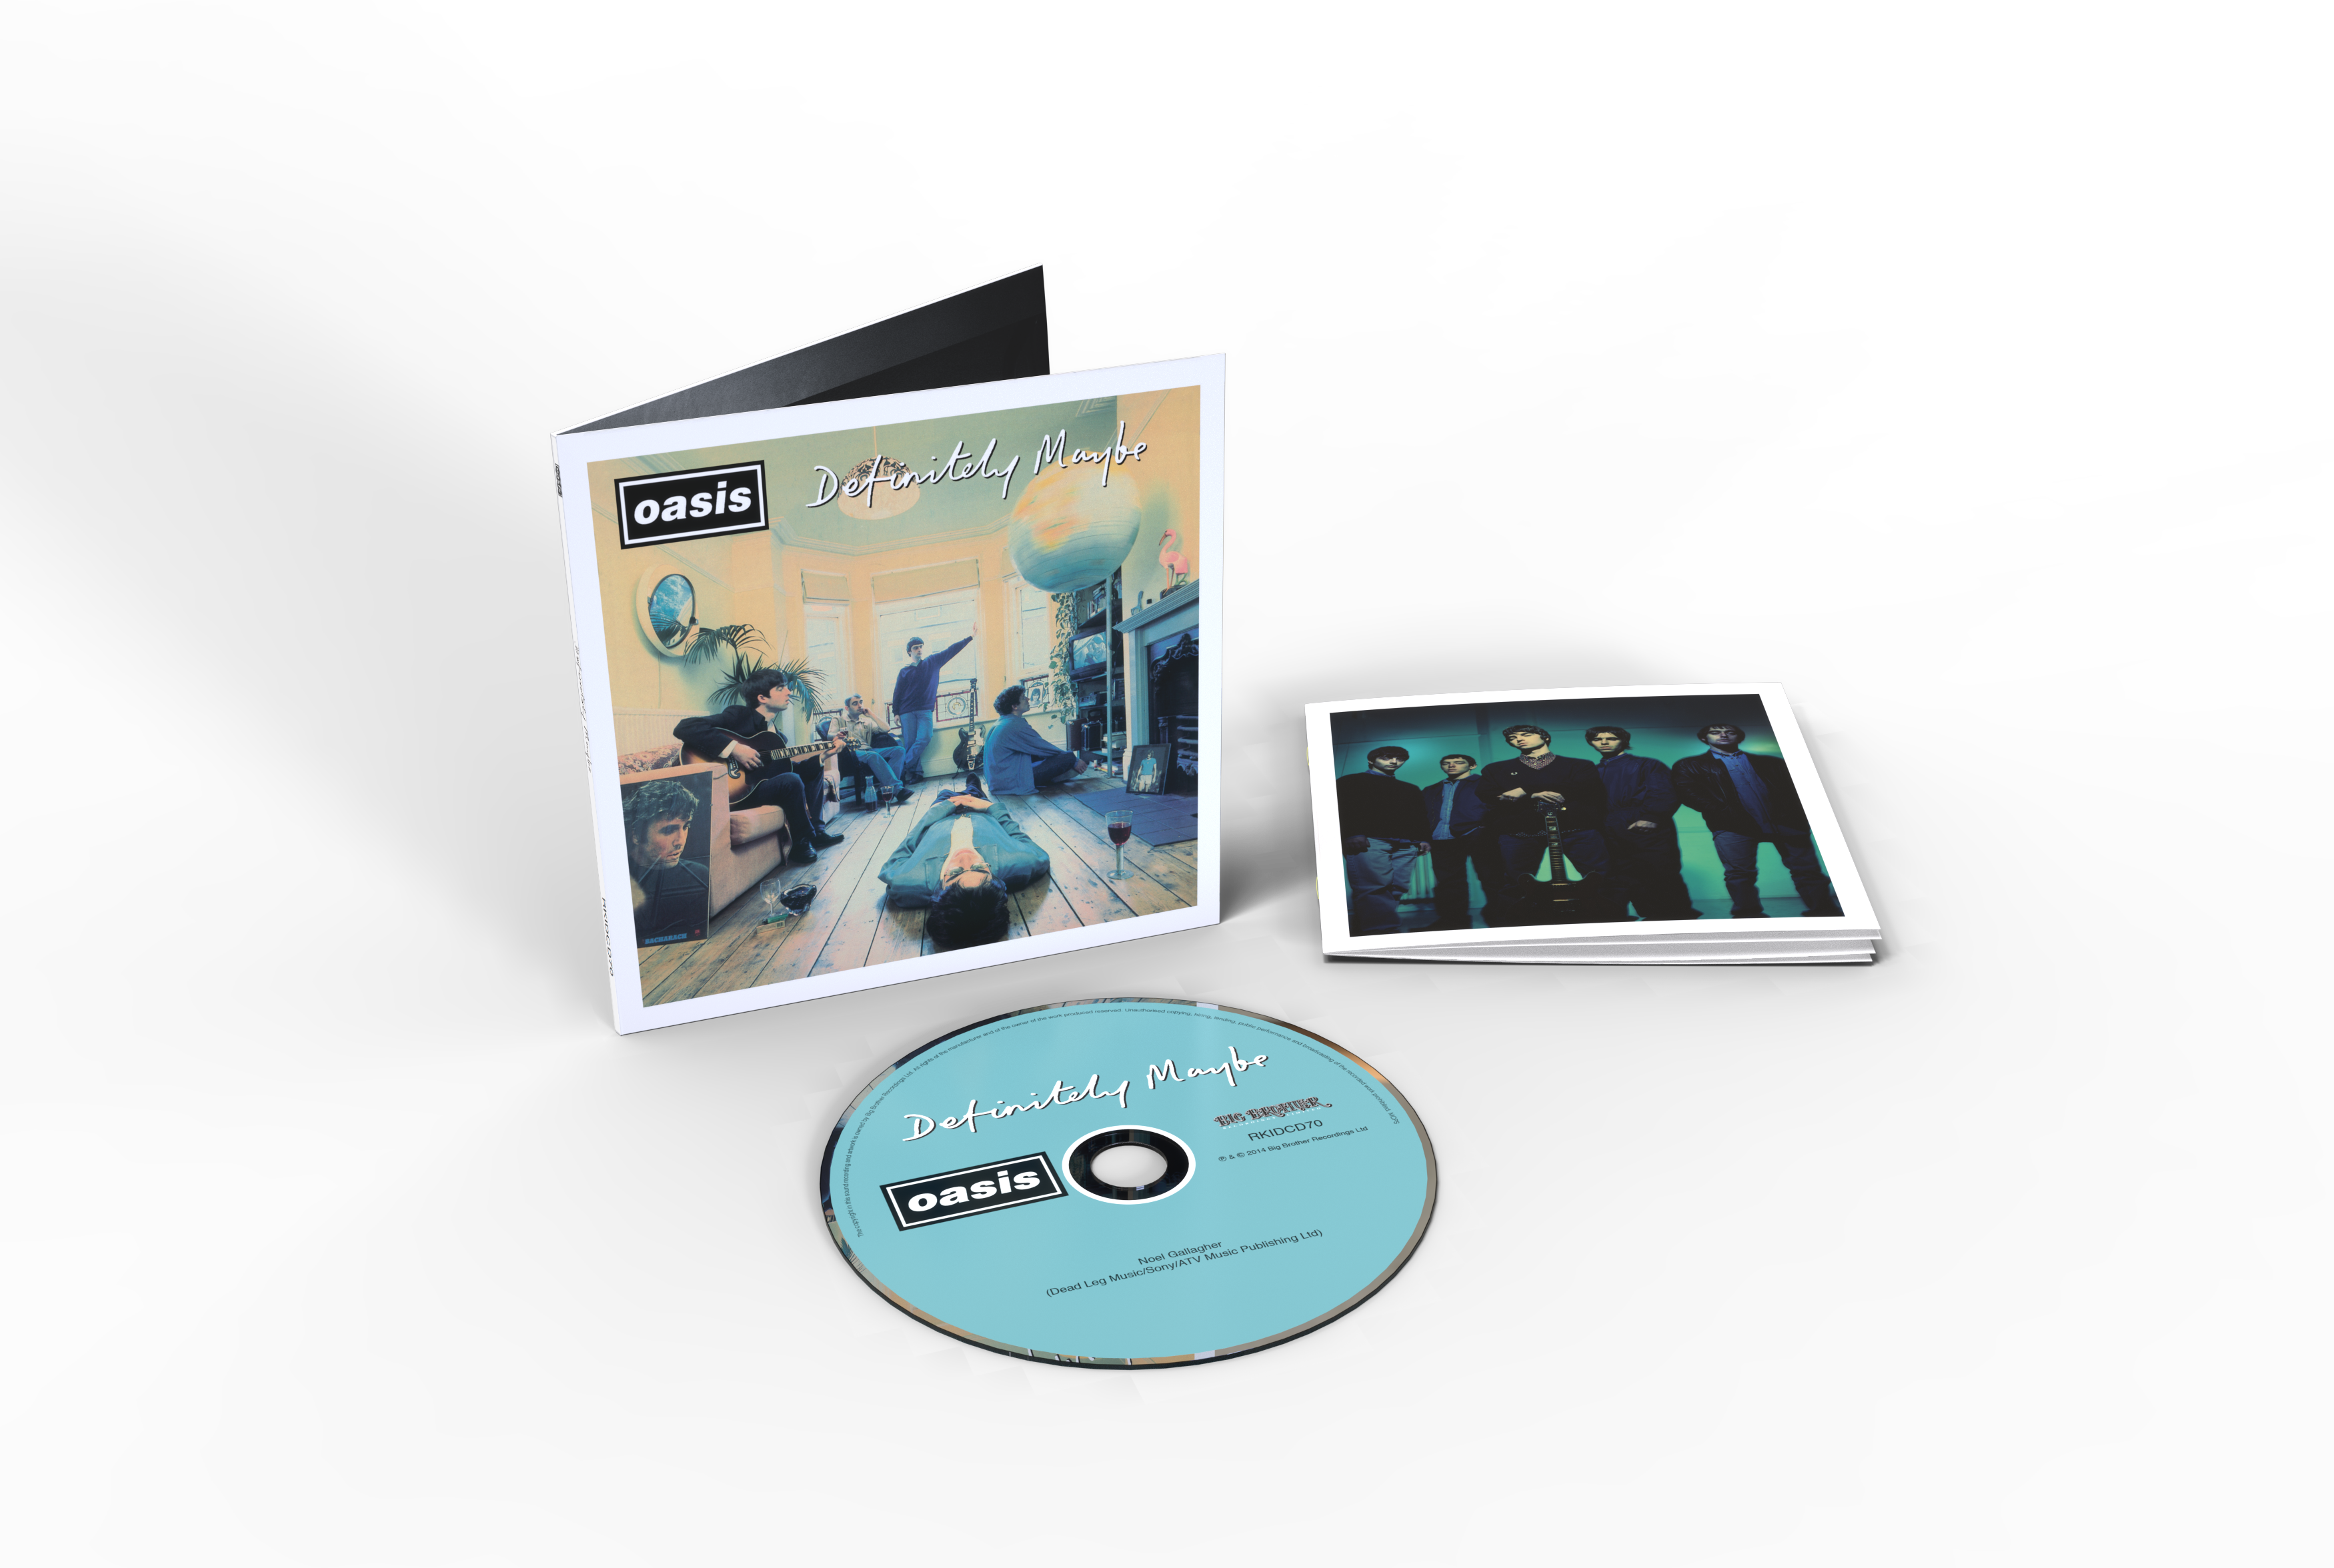 A look at one of the limited edition ‘Definitely Maybe’ vinyls